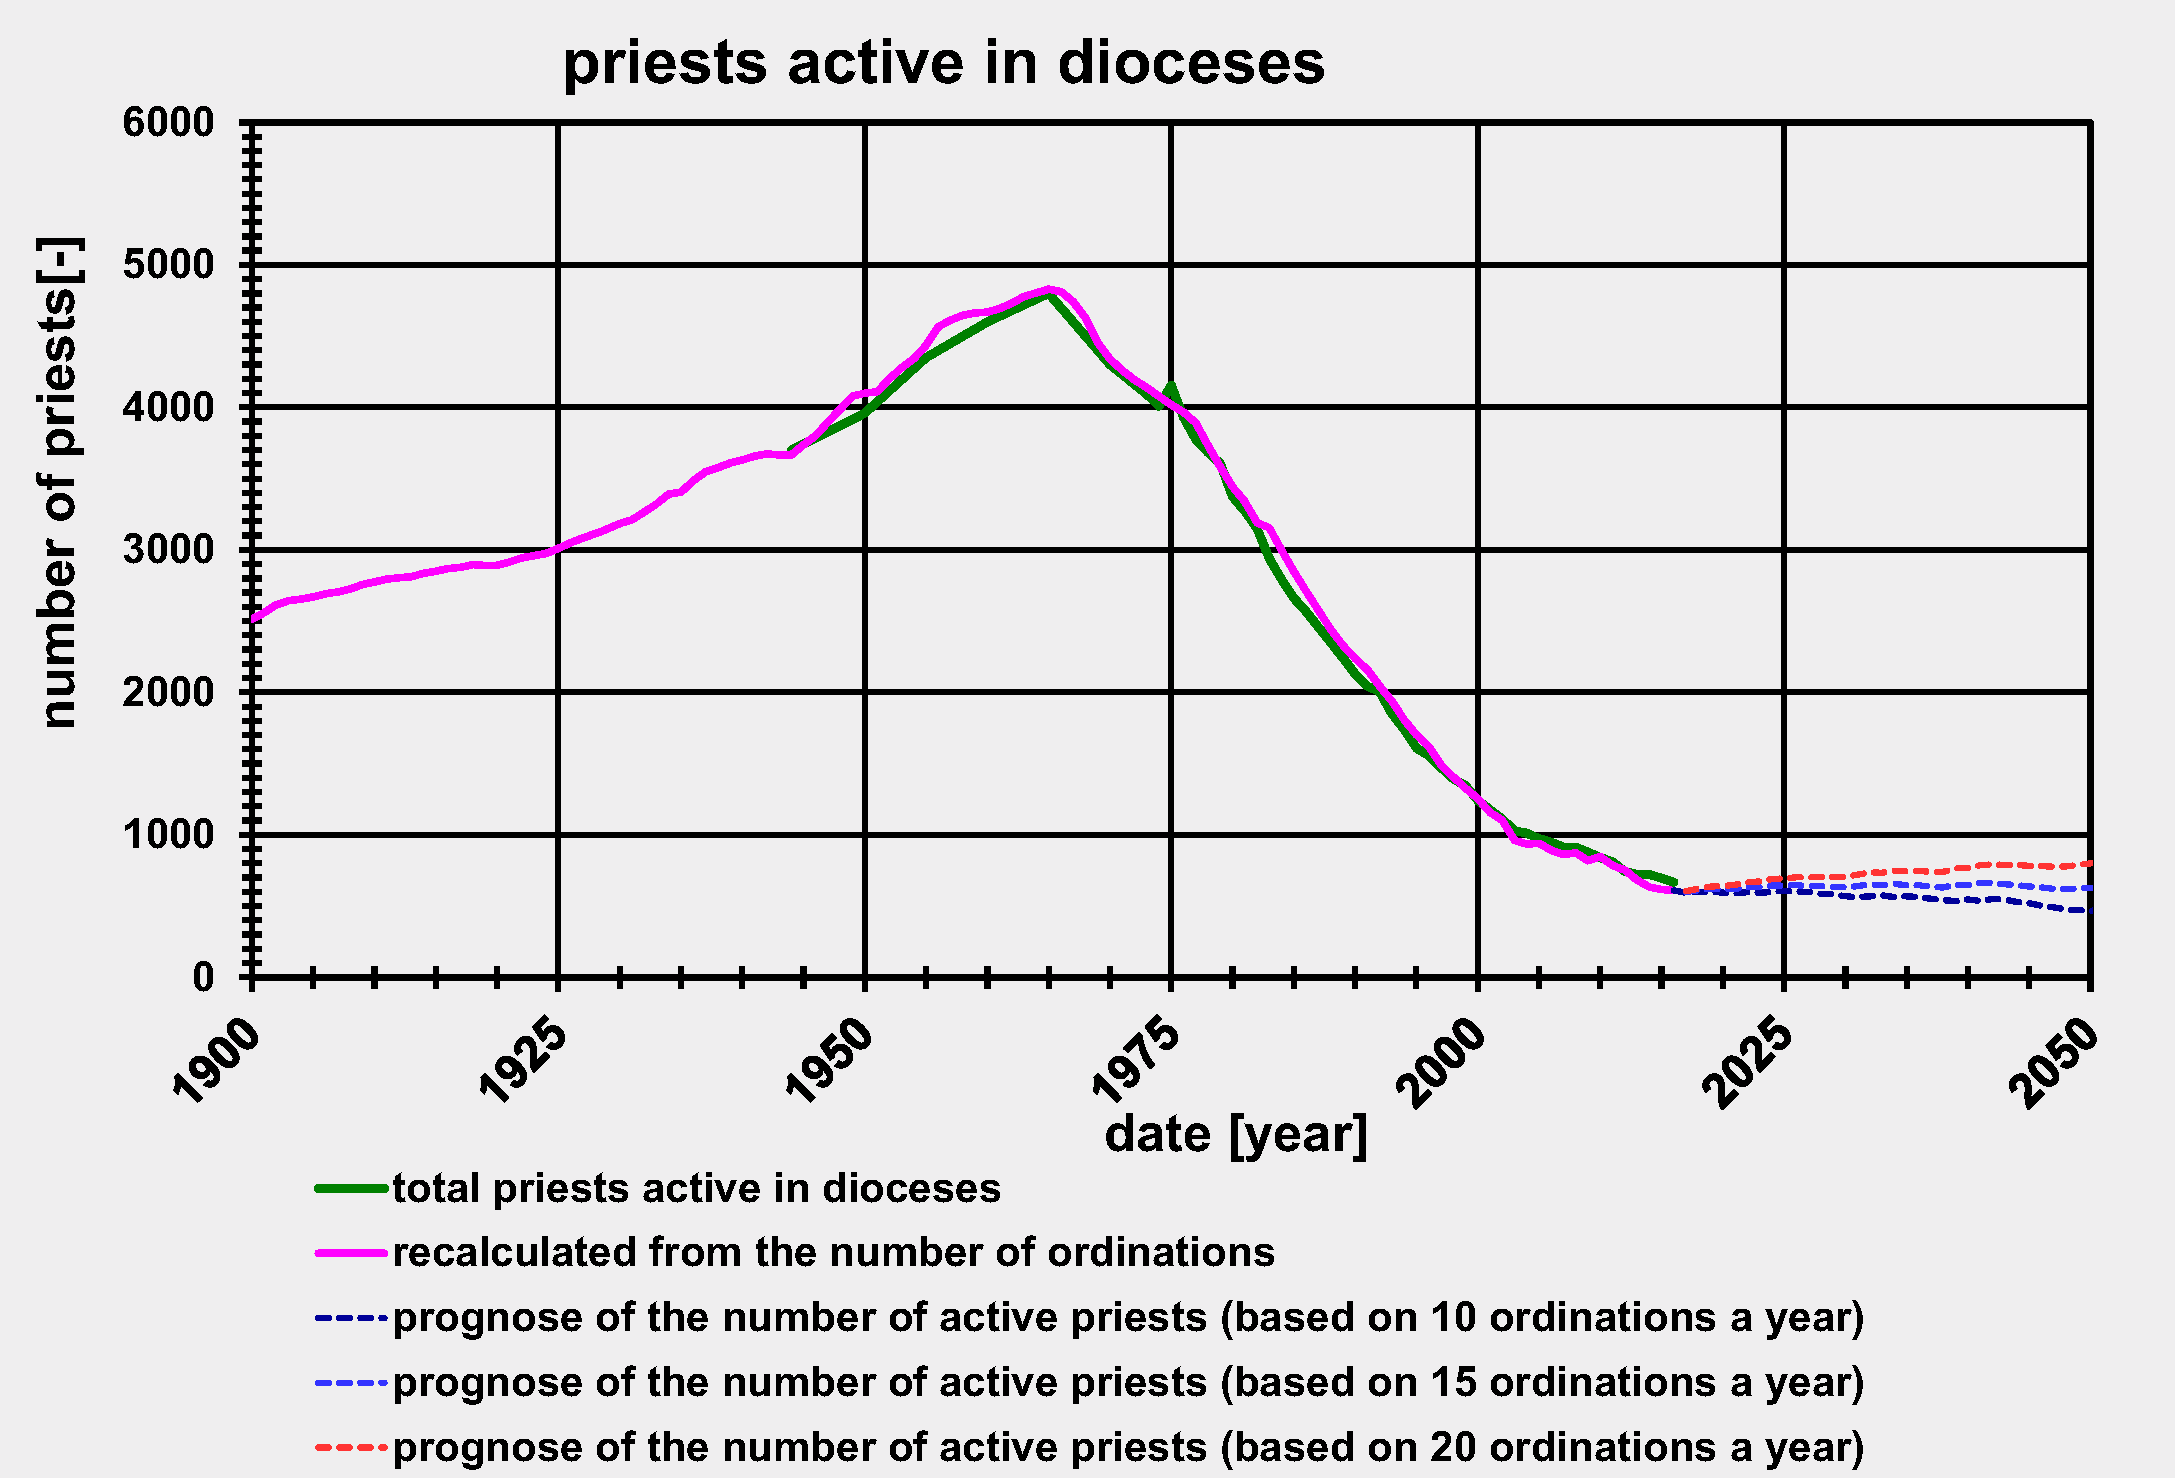 Figure 3:  Overview of priests active in the Dutch dioceses since 1900 comparing with an extrapolation based on the number of ordinations till 2050 (last available data 2016)